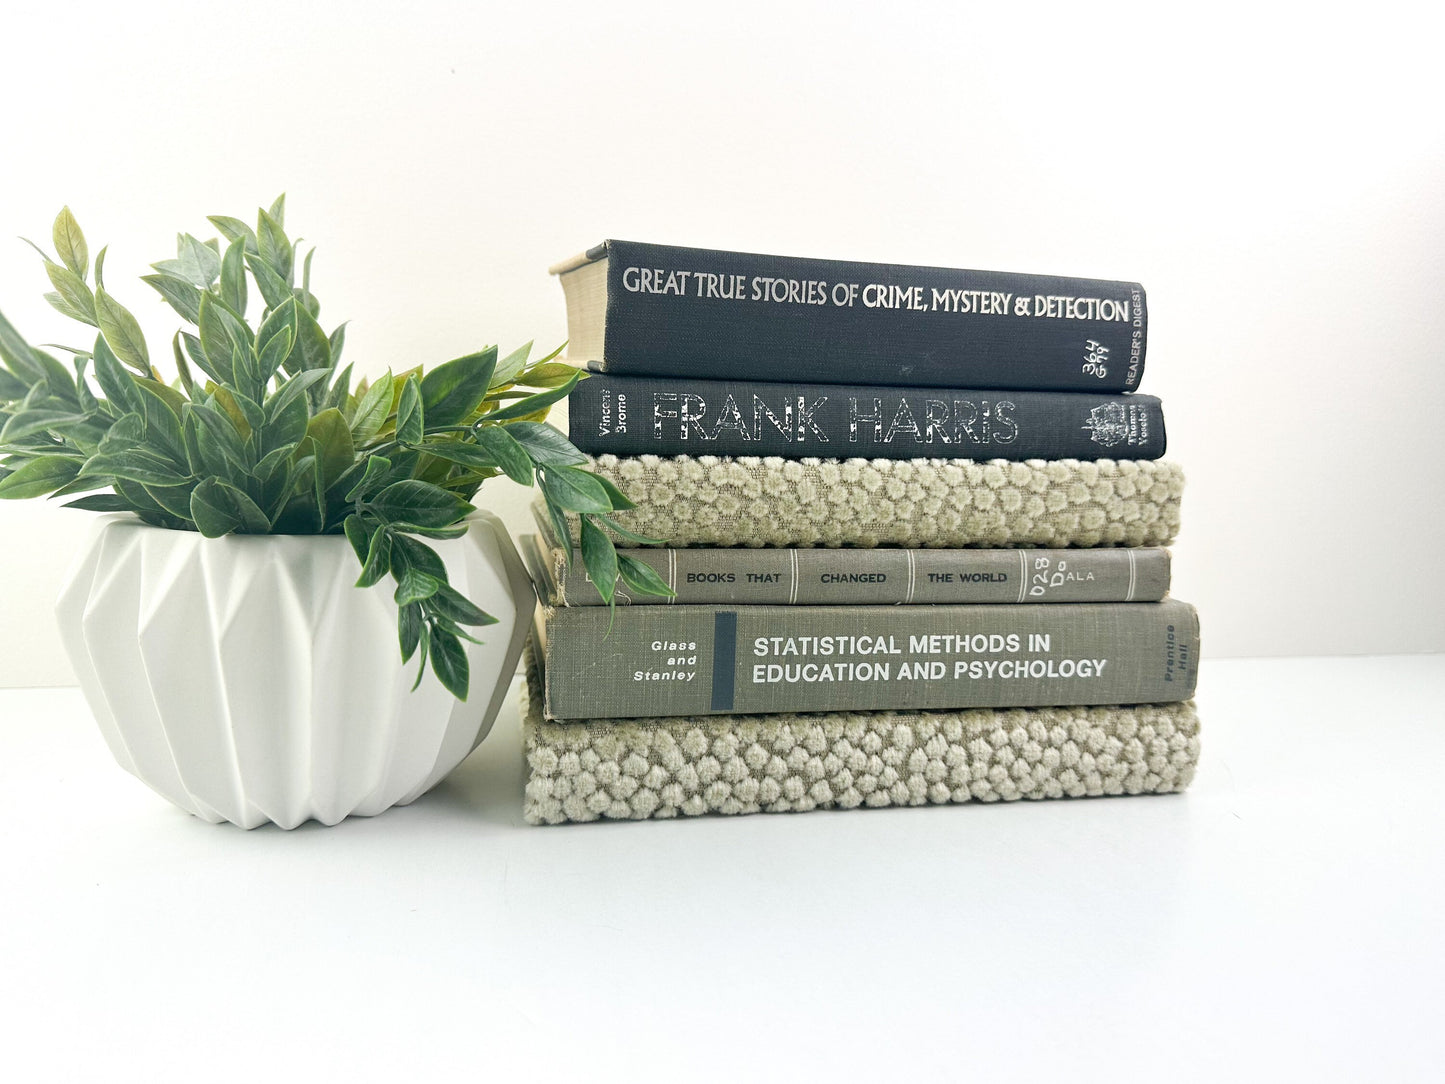 Book Decor, Neutral Home Decor, Textured Home Accents, Black and Tan